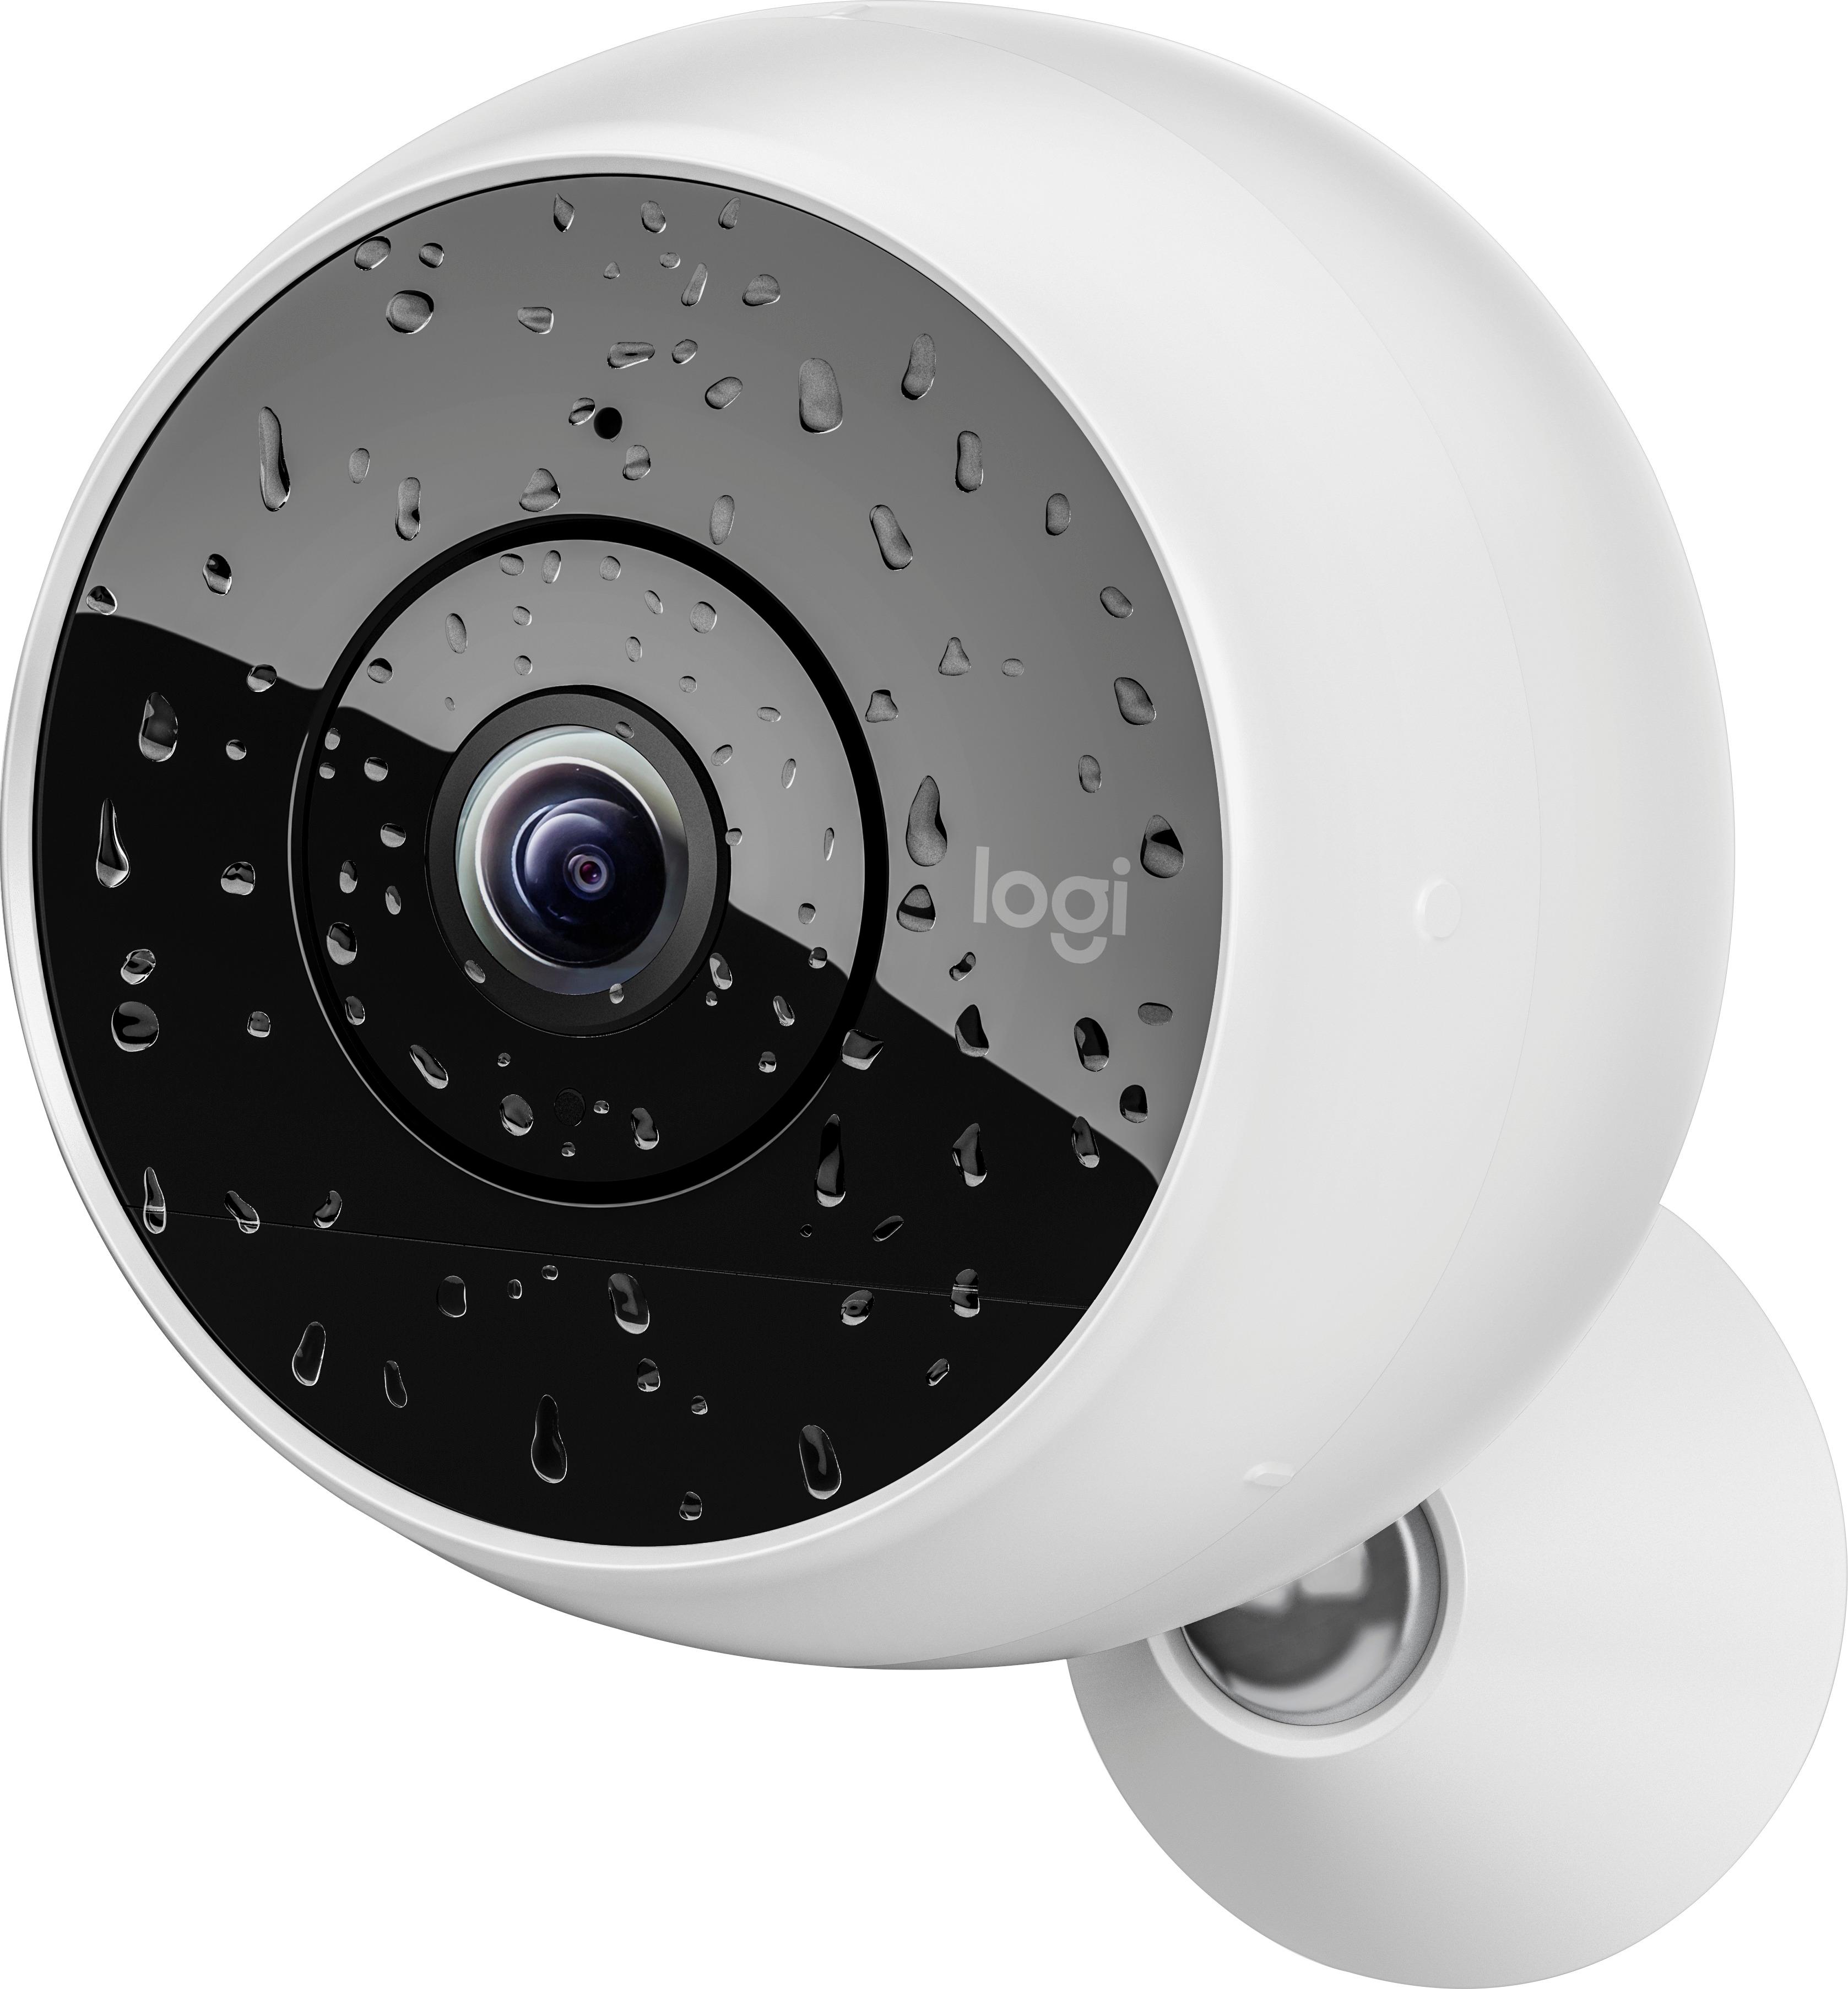 Logitech Circle 2 Indoor/Outdoor 1080p Wi-Fi Home Security Camera White 961-000416 Best Buy